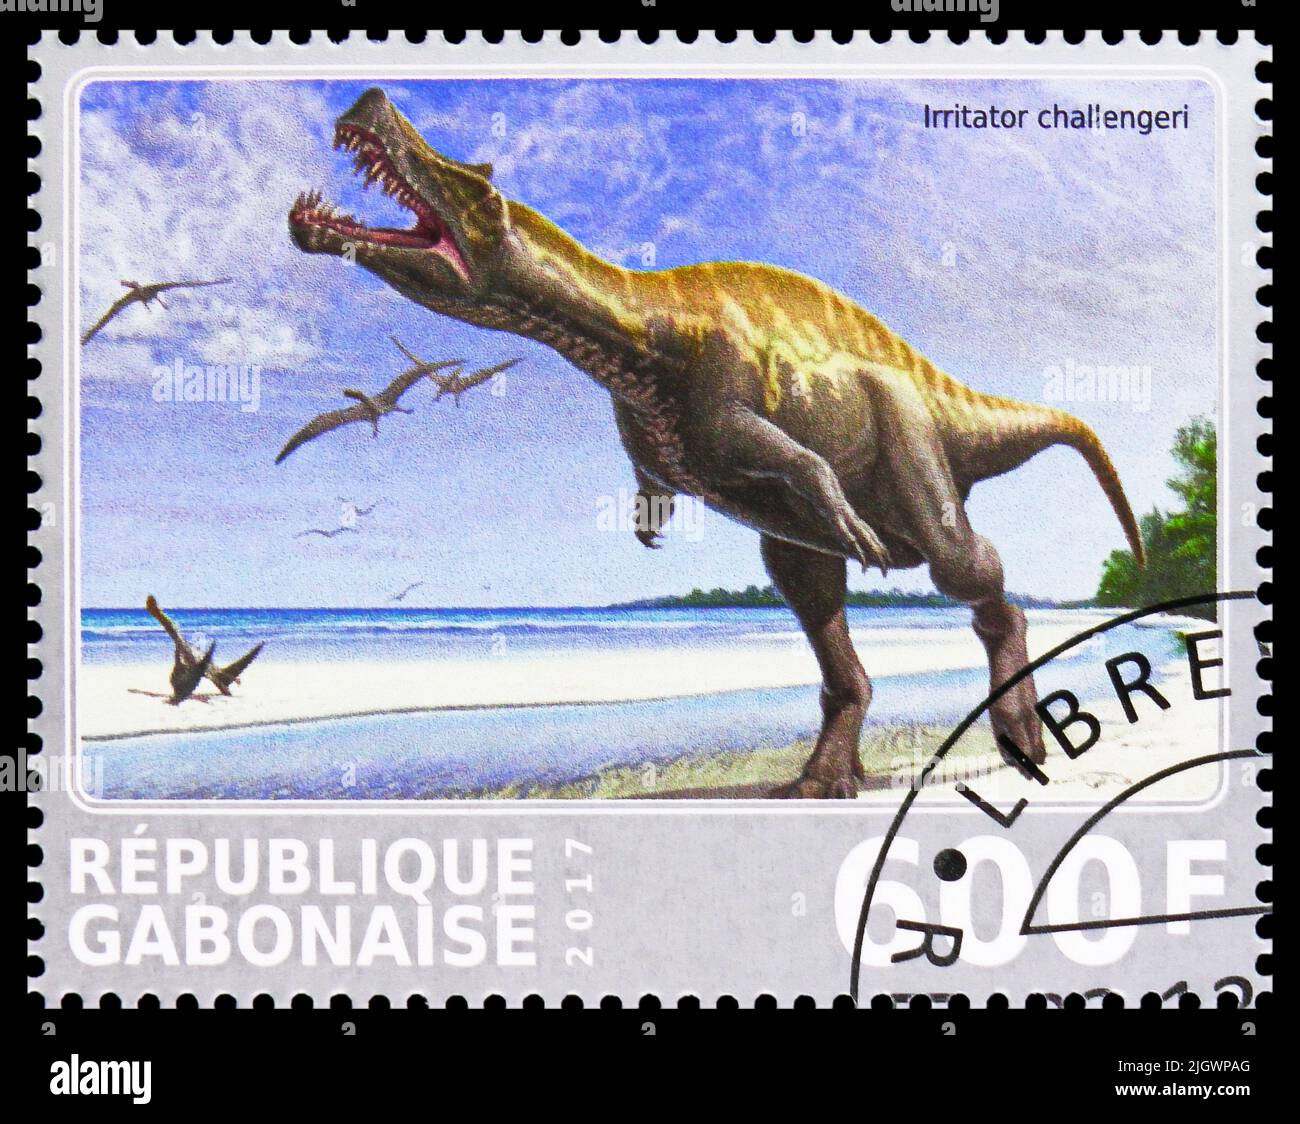 MOSCOW, RUSSIA - JUNE 17, 2022: Postage stamp printed in Gabon shows Irritator challengeri, Dinosaurs serie, circa 2017 Stock Photo